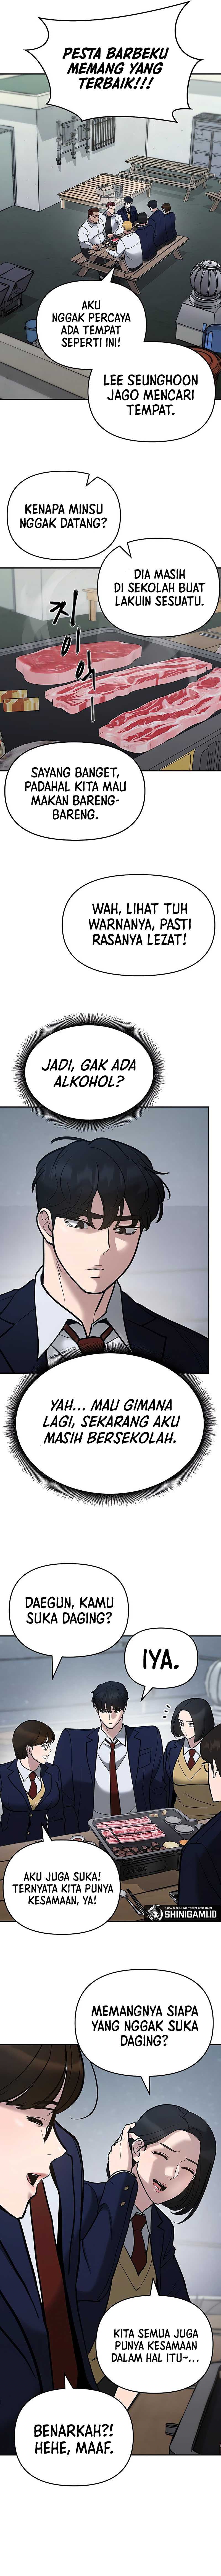 The Bully In Charge Chapter 53